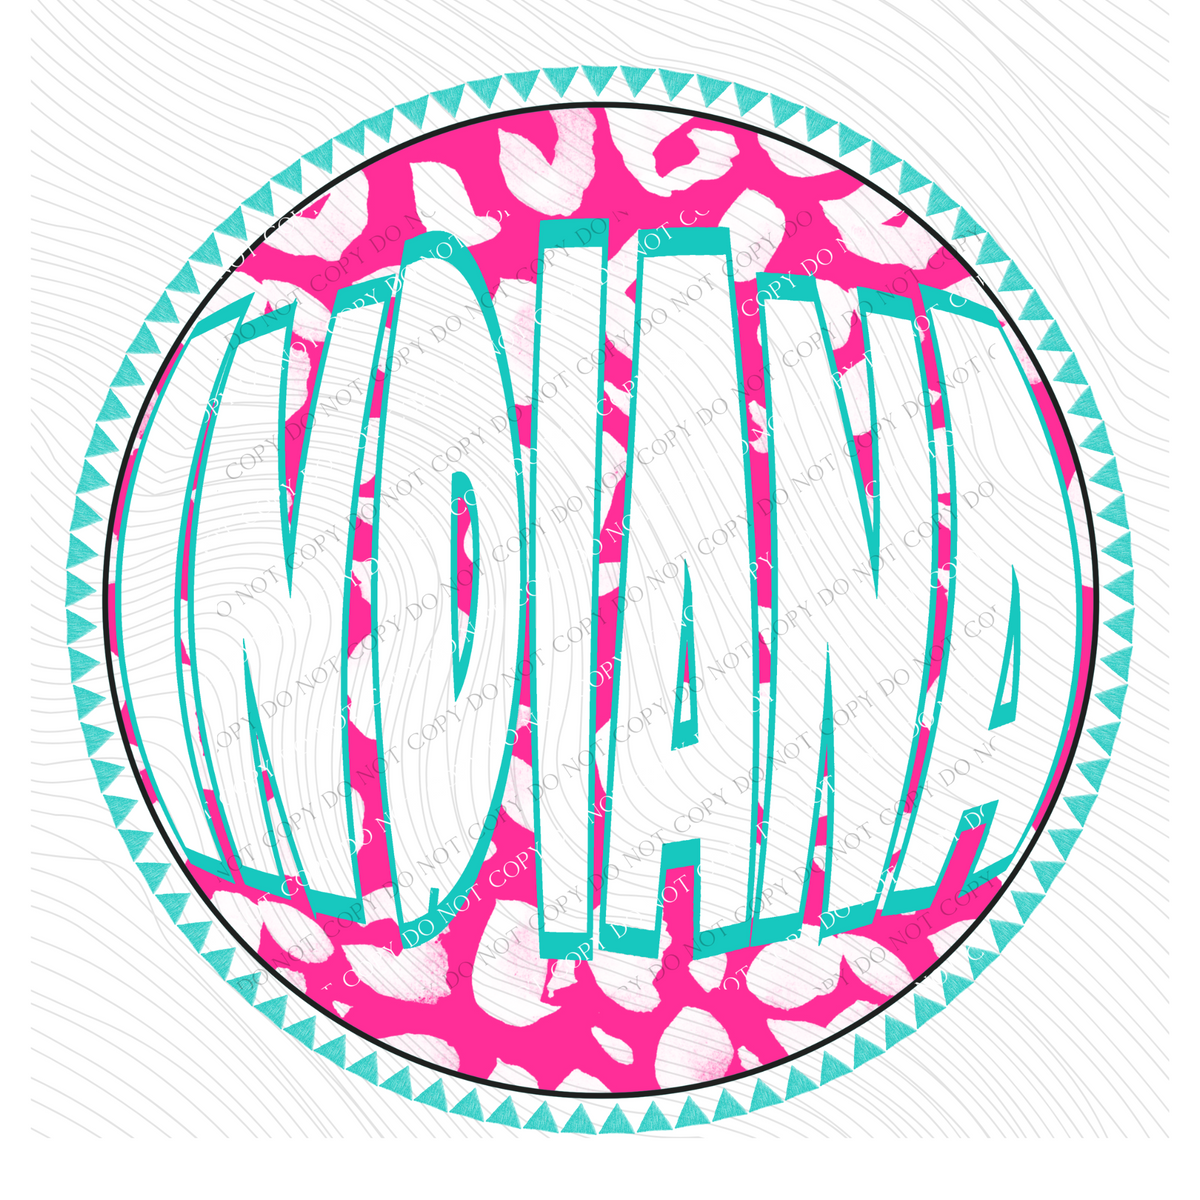 Indiana Groovy Leopard Shadow & Non Shadow (both included) Cutout in Pink & Teal Digital Design, PNG